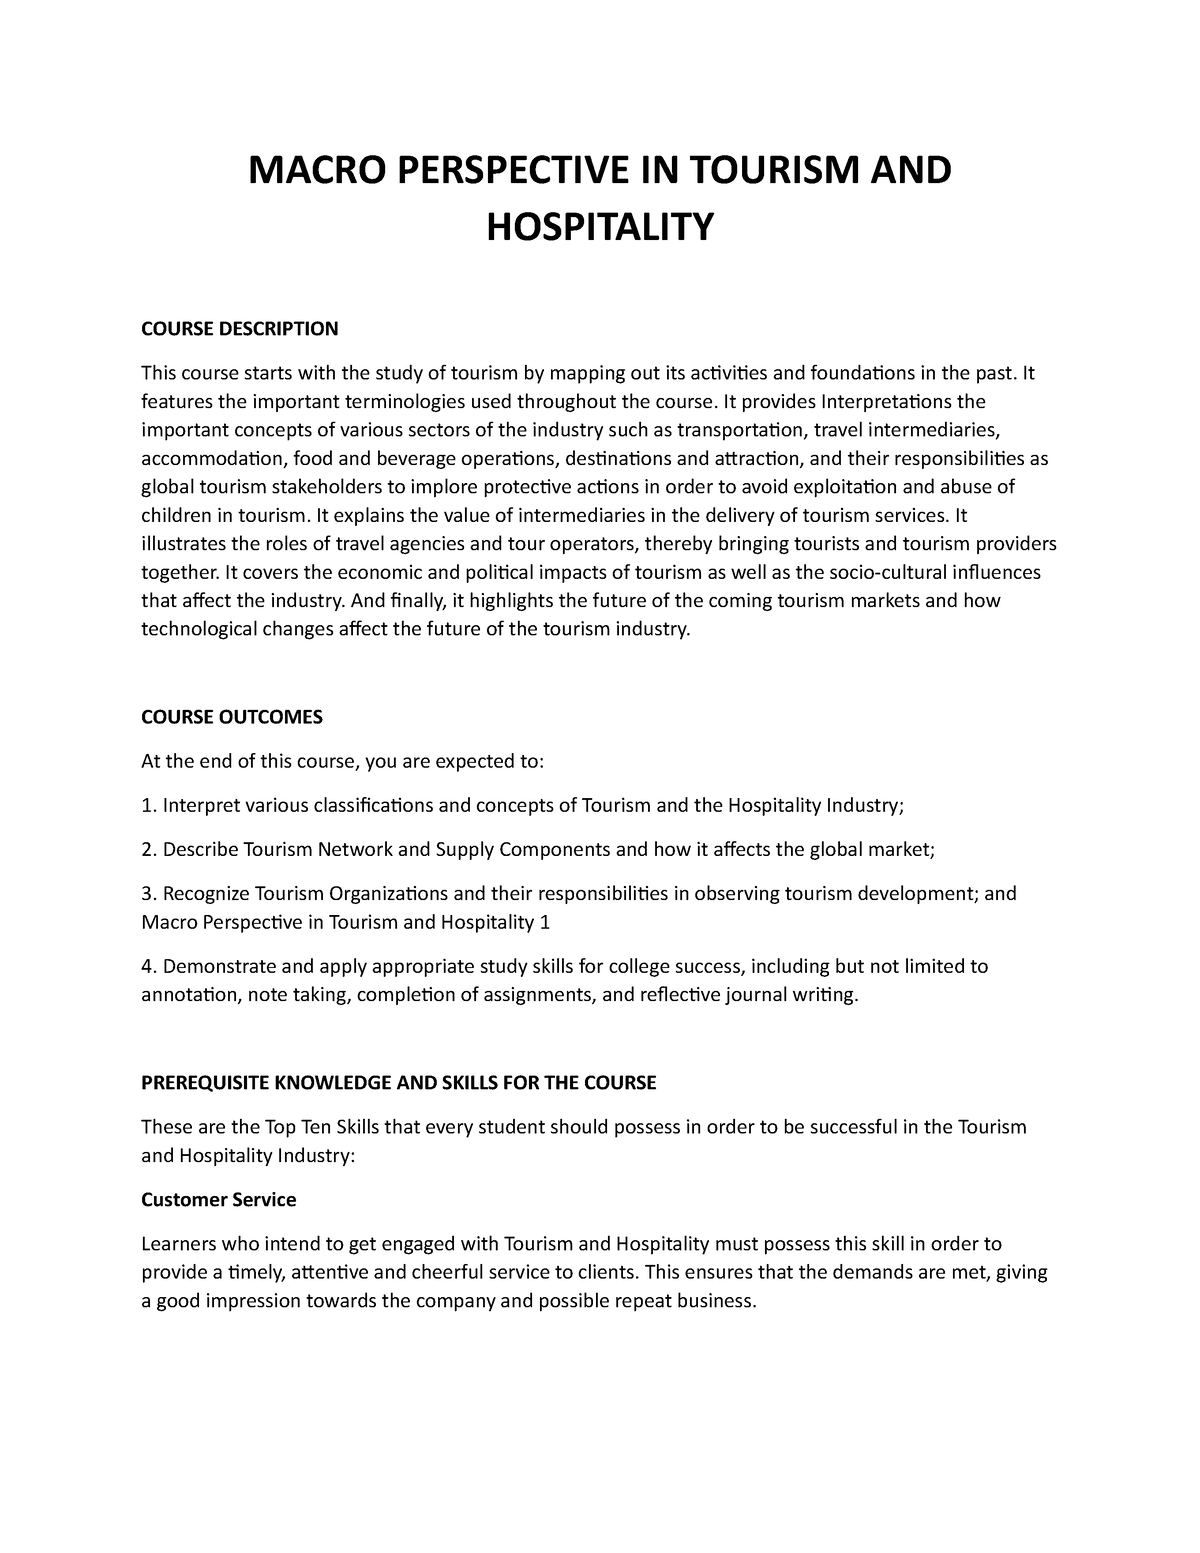 micro perspective of tourism and hospitality chapter 5